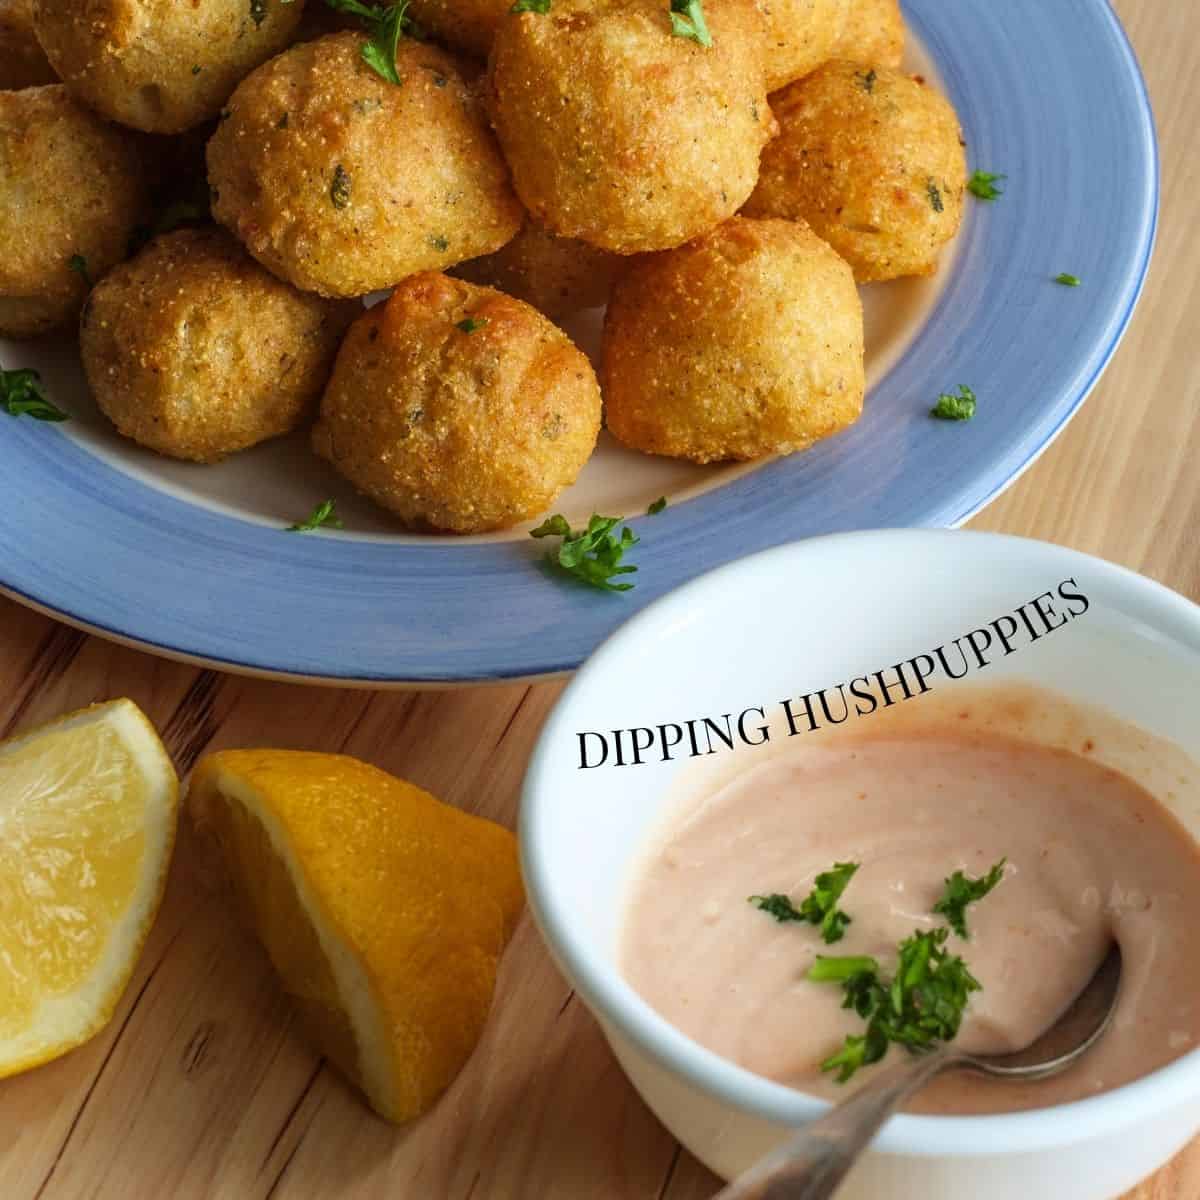 A stack of Hushpuppies on a blue dinner plate on a wooden cutting board with a side of Aioli Sauce in a small white bowl with sliced lemons on the side